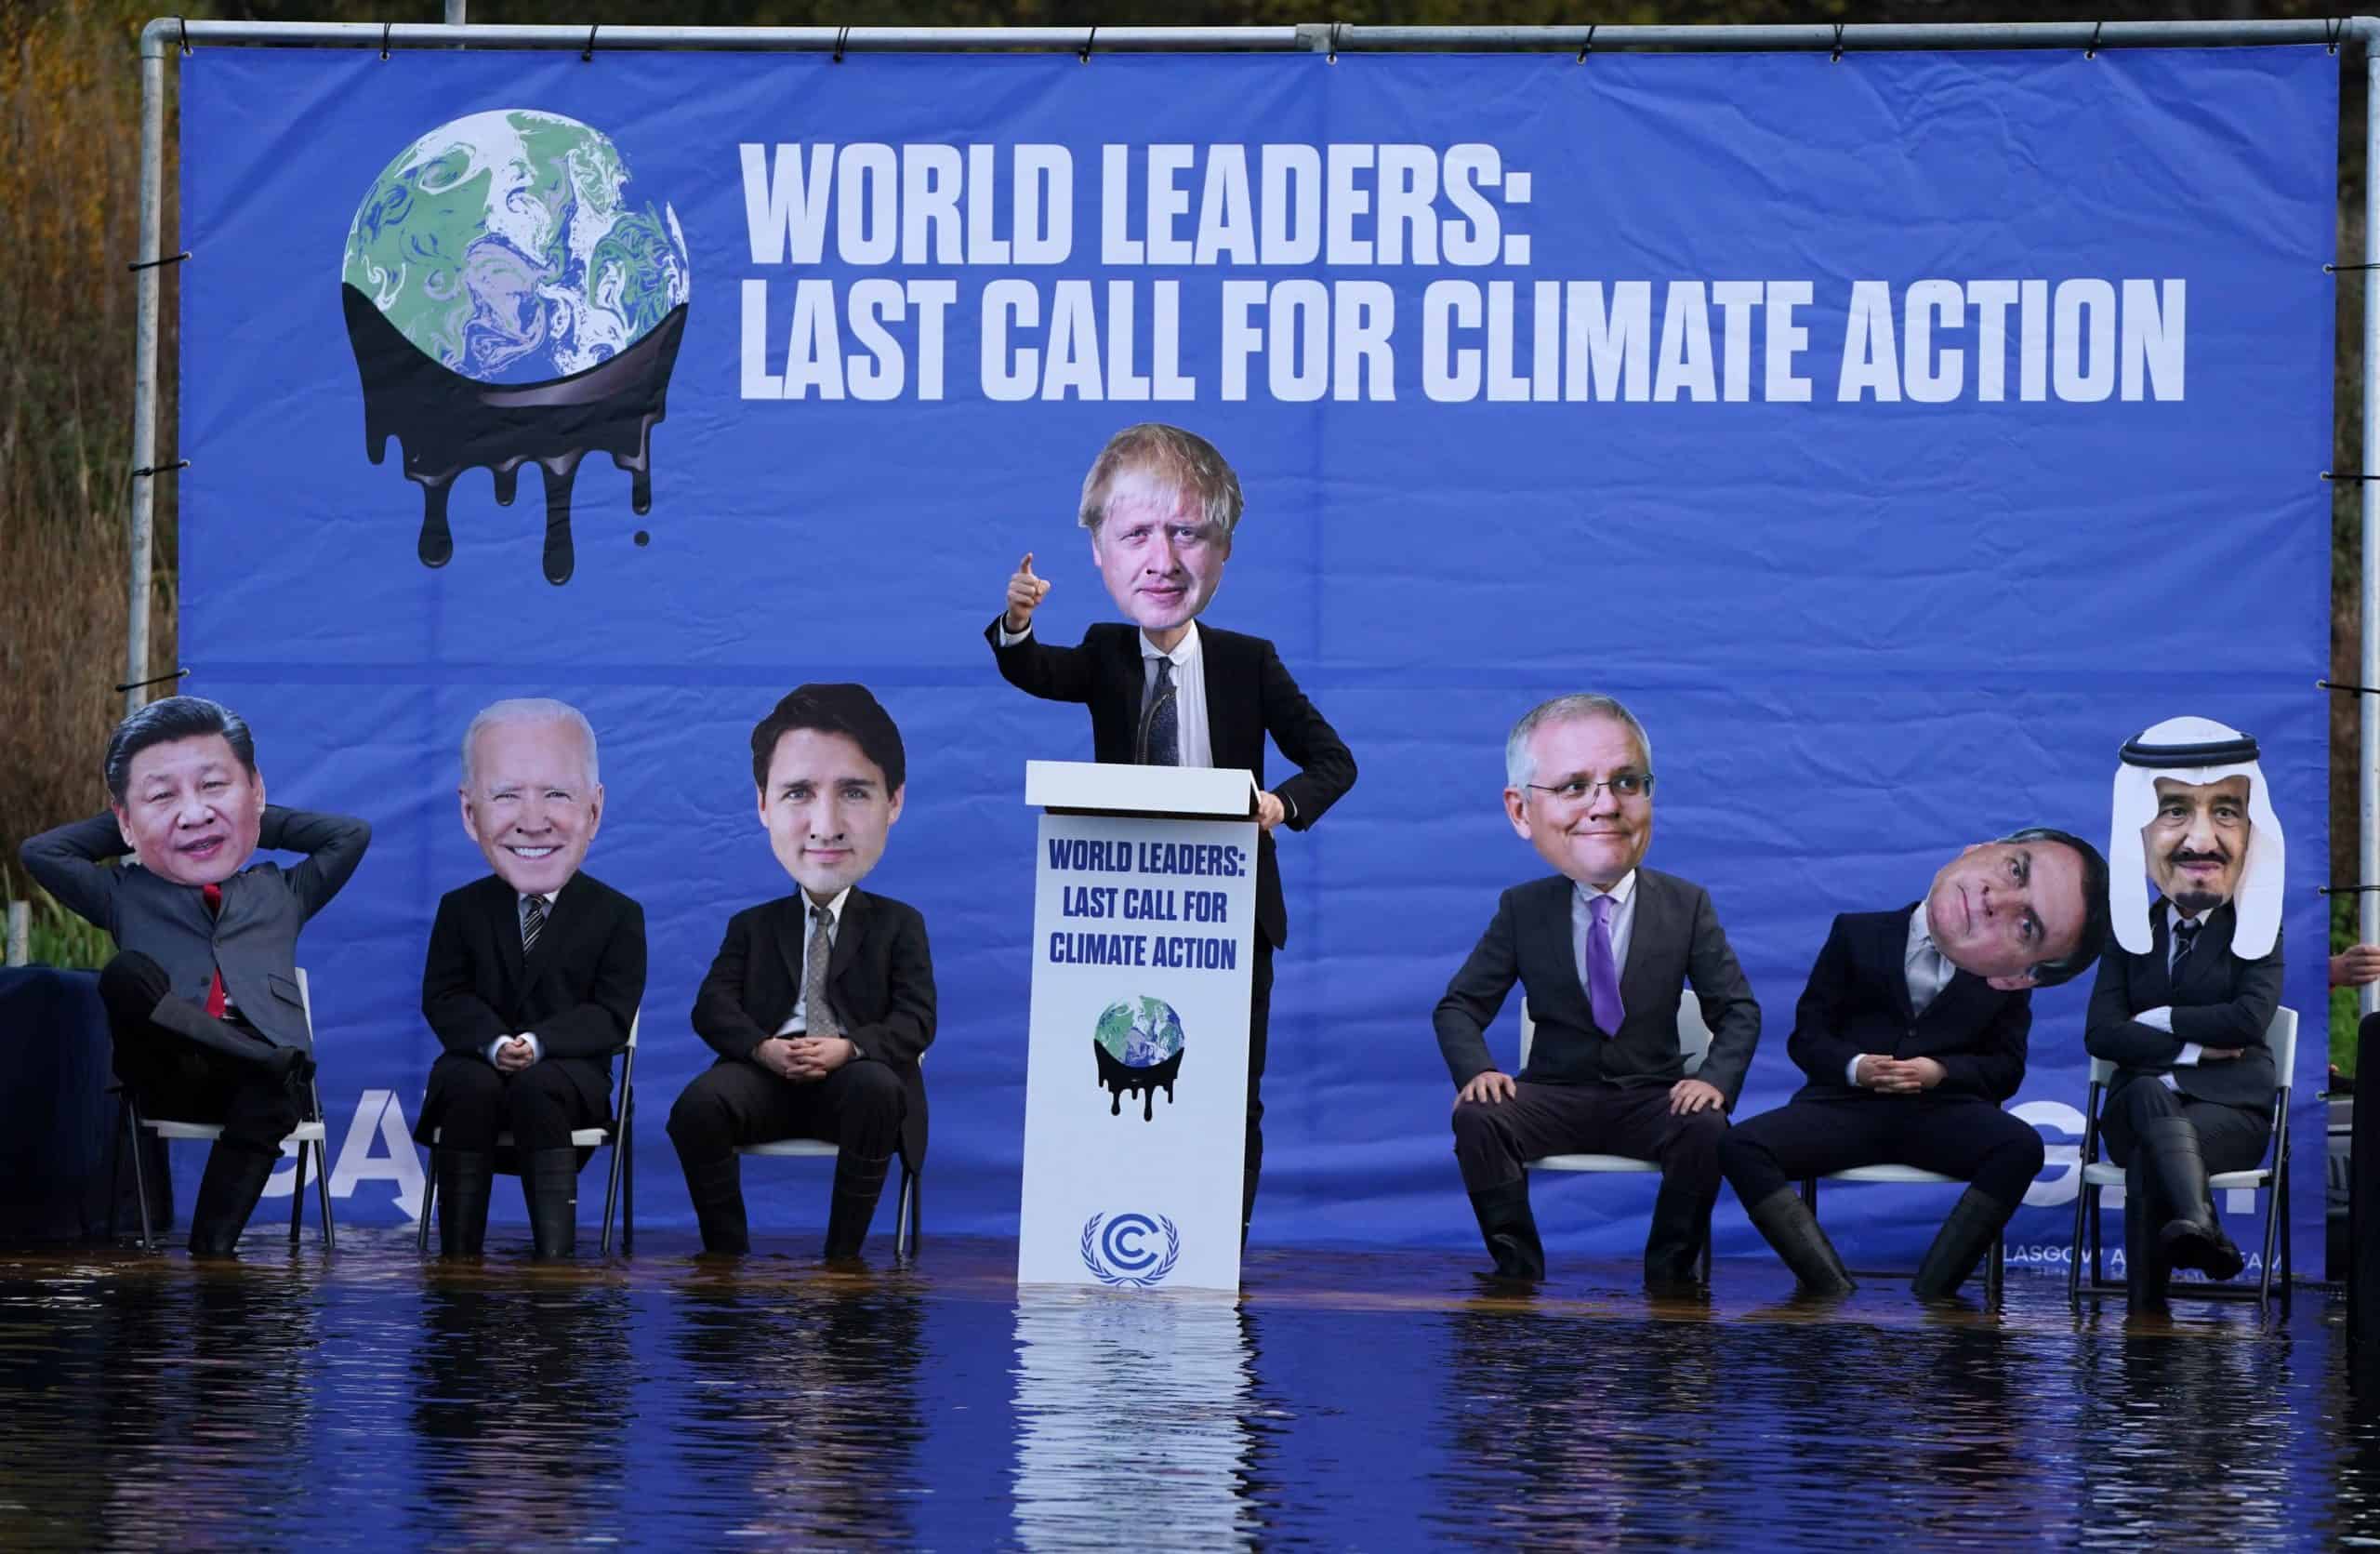 Brits think politicians’ hypocrisy will hinder climate change battle